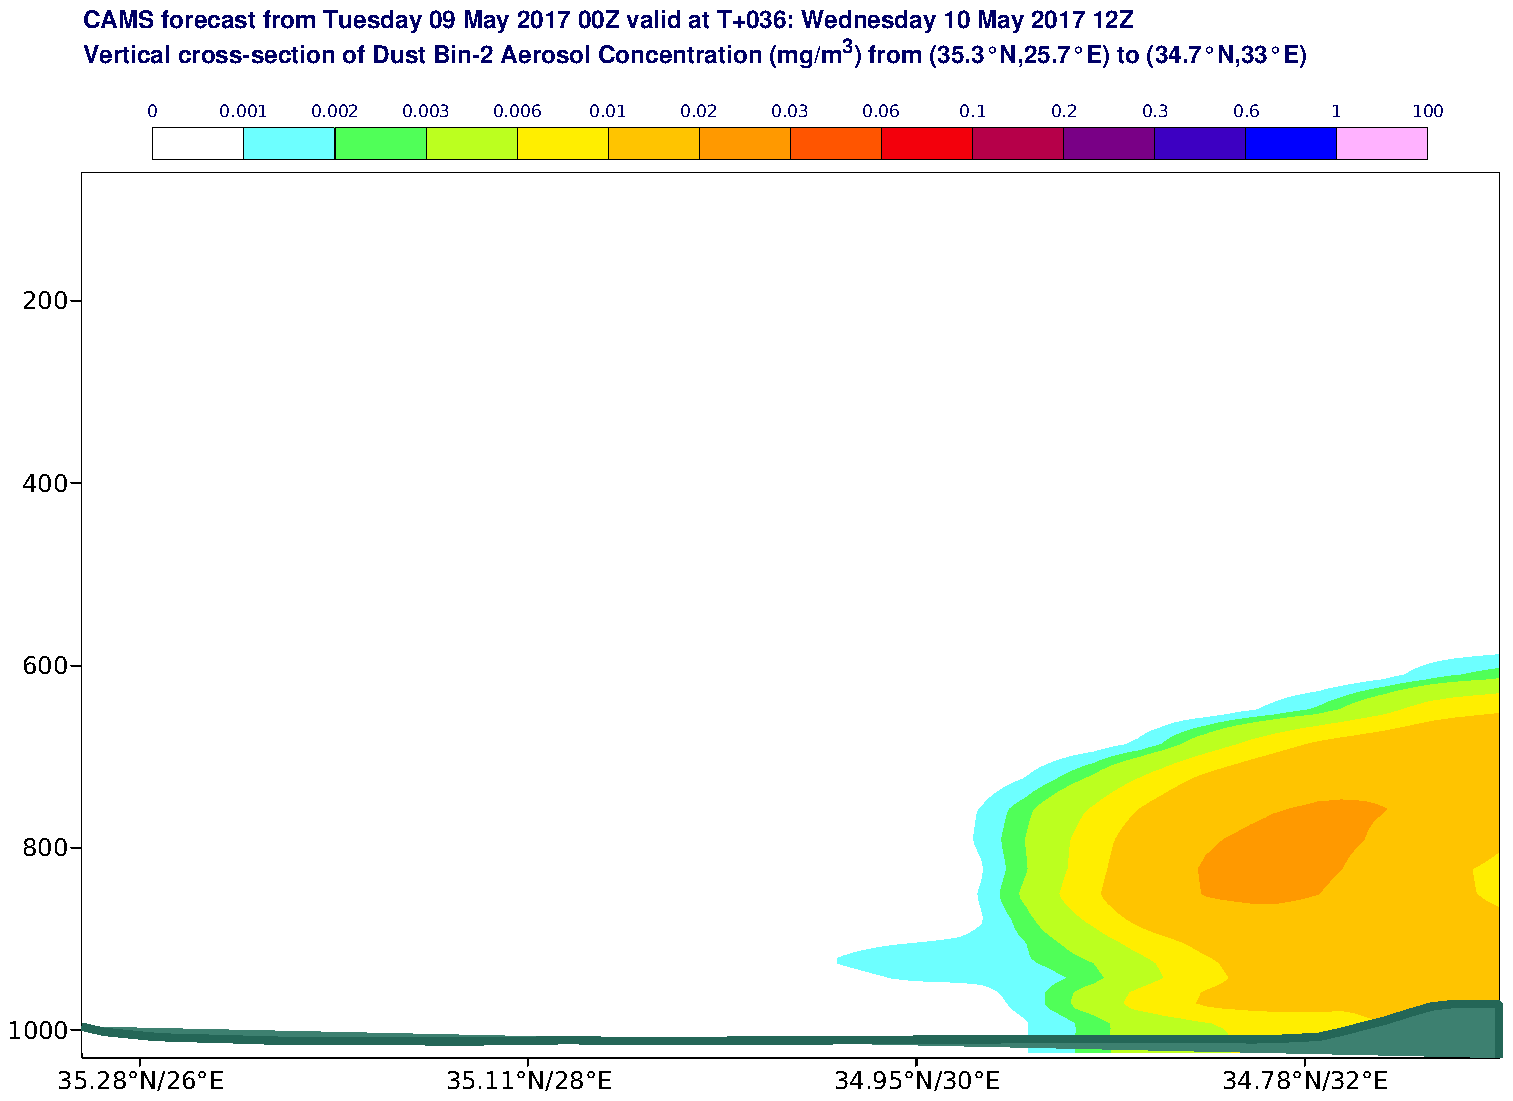 Vertical cross-section of Dust Bin-2 Aerosol Concentration (mg/m3) valid at T36 - 2017-05-10 12:00